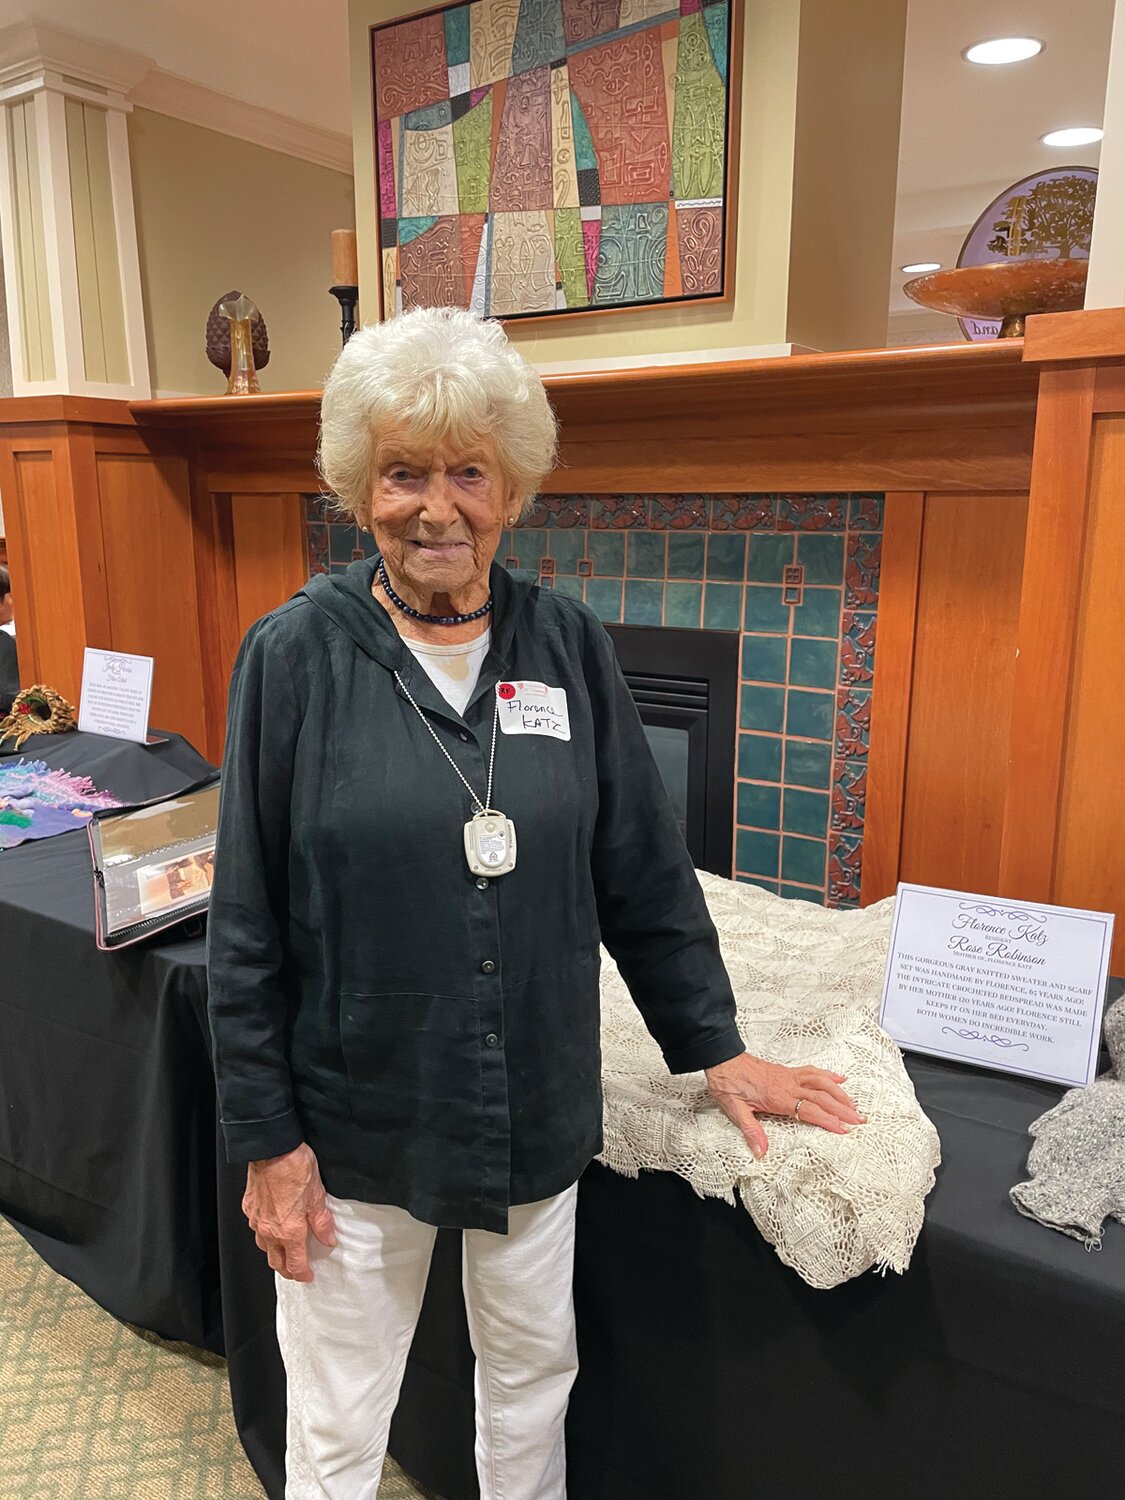 WHAT A STORY SHE HAS: 101 year old, Florence Katz from Cranston, shows off the bedspread her mother made when she was born.